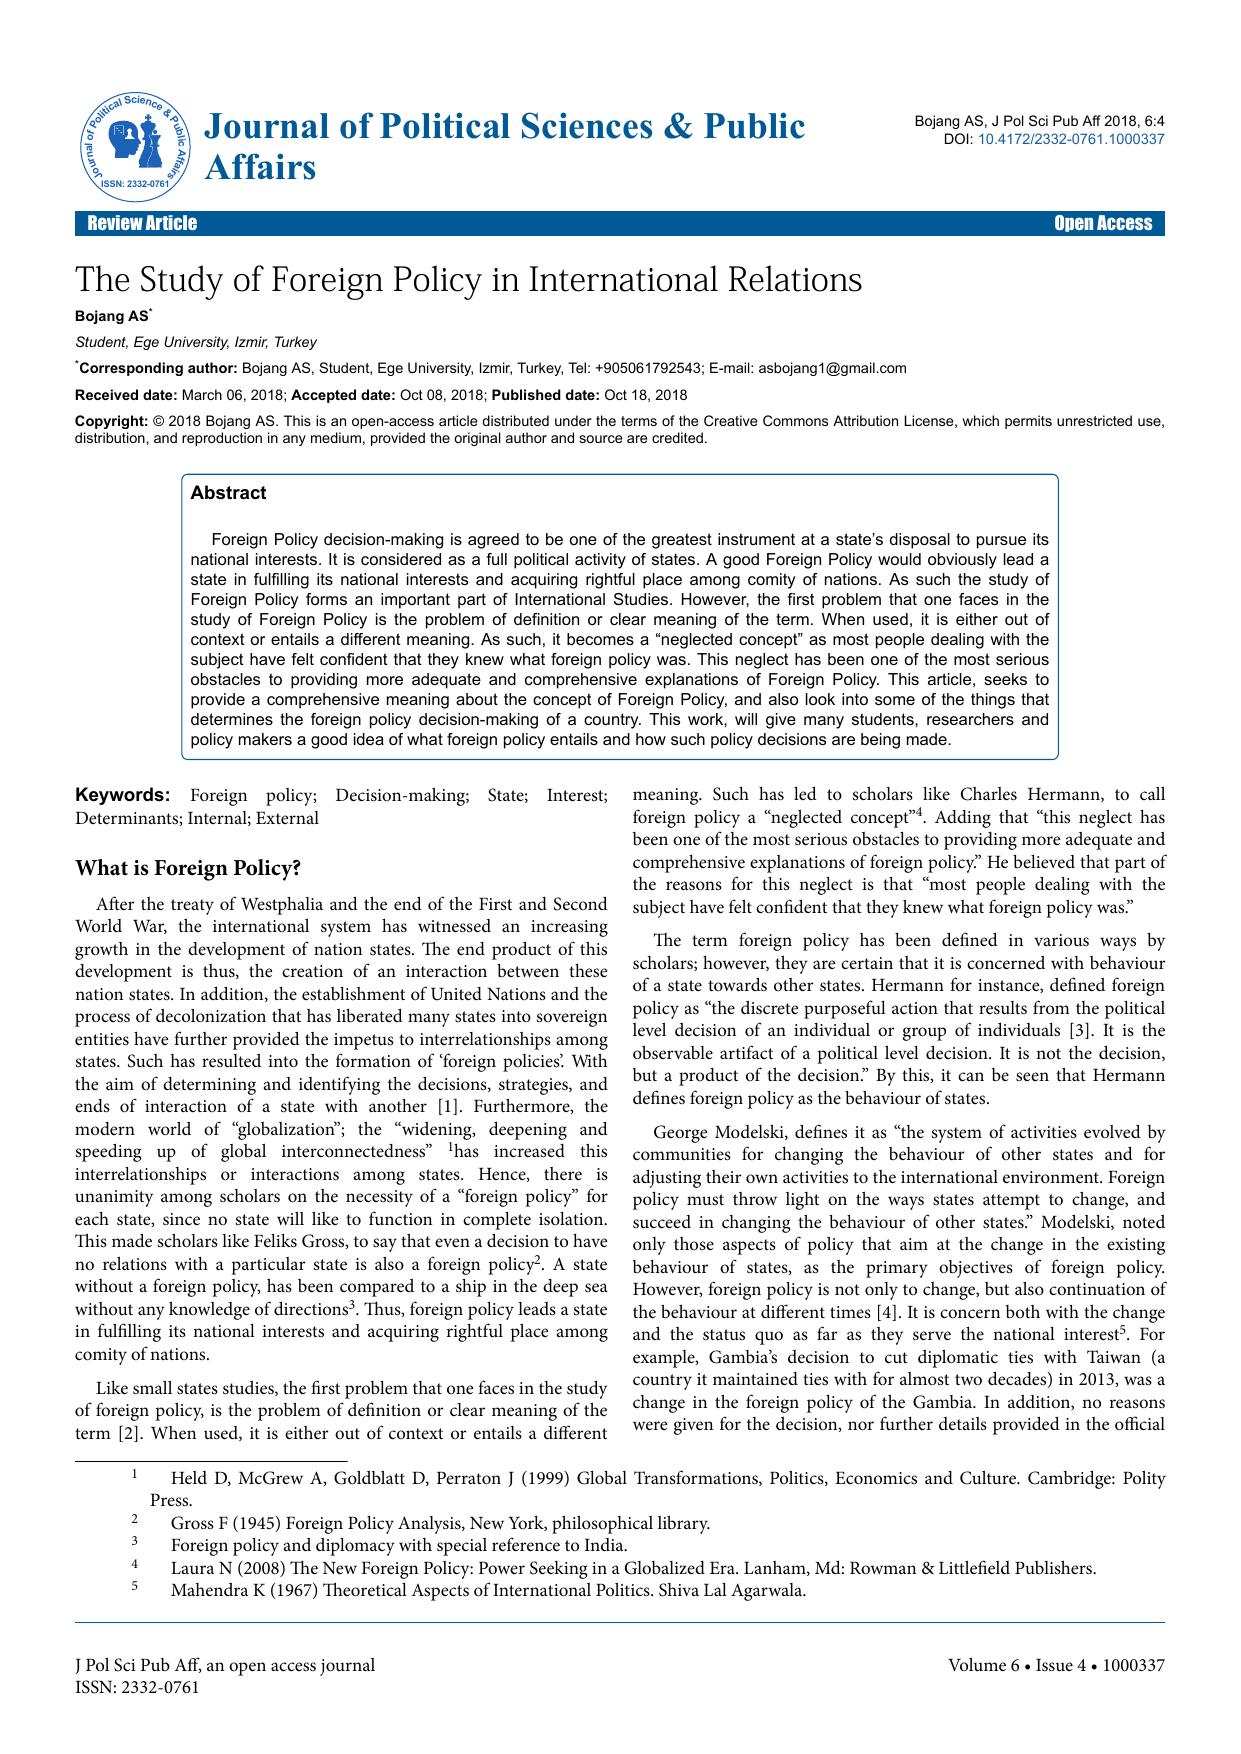 The Study of Foreign Policy in International Relations